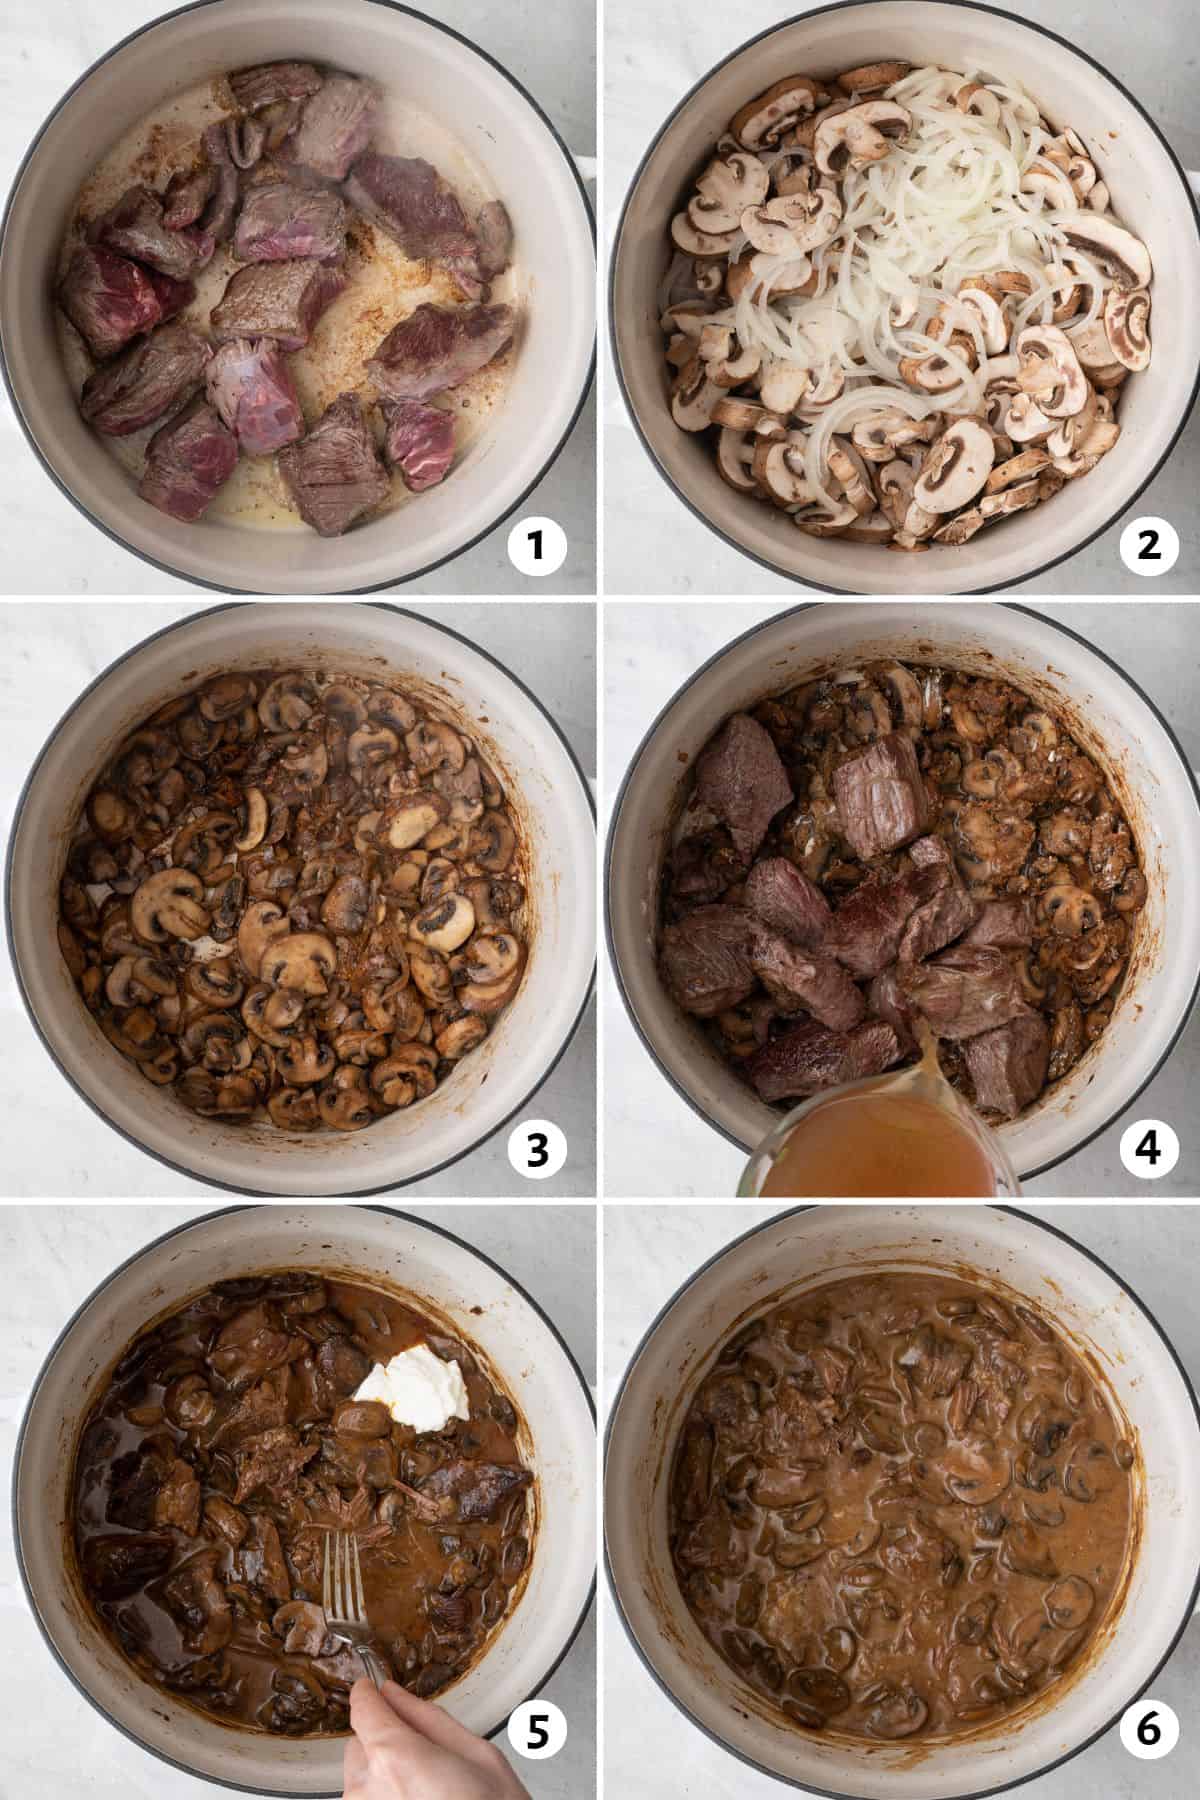 6 image collage making recipe: 1- Seasoned beef in Dutch oven partially seared, 2- Beef removed from pan and mushrooms and onions added before cooked, 3- Mushrooms and onions after sauteed to show browned caramelization after deglazing with apple cider vinegar, 4- stock added, 5- greek yogurt added, 6- after combined and thickened.